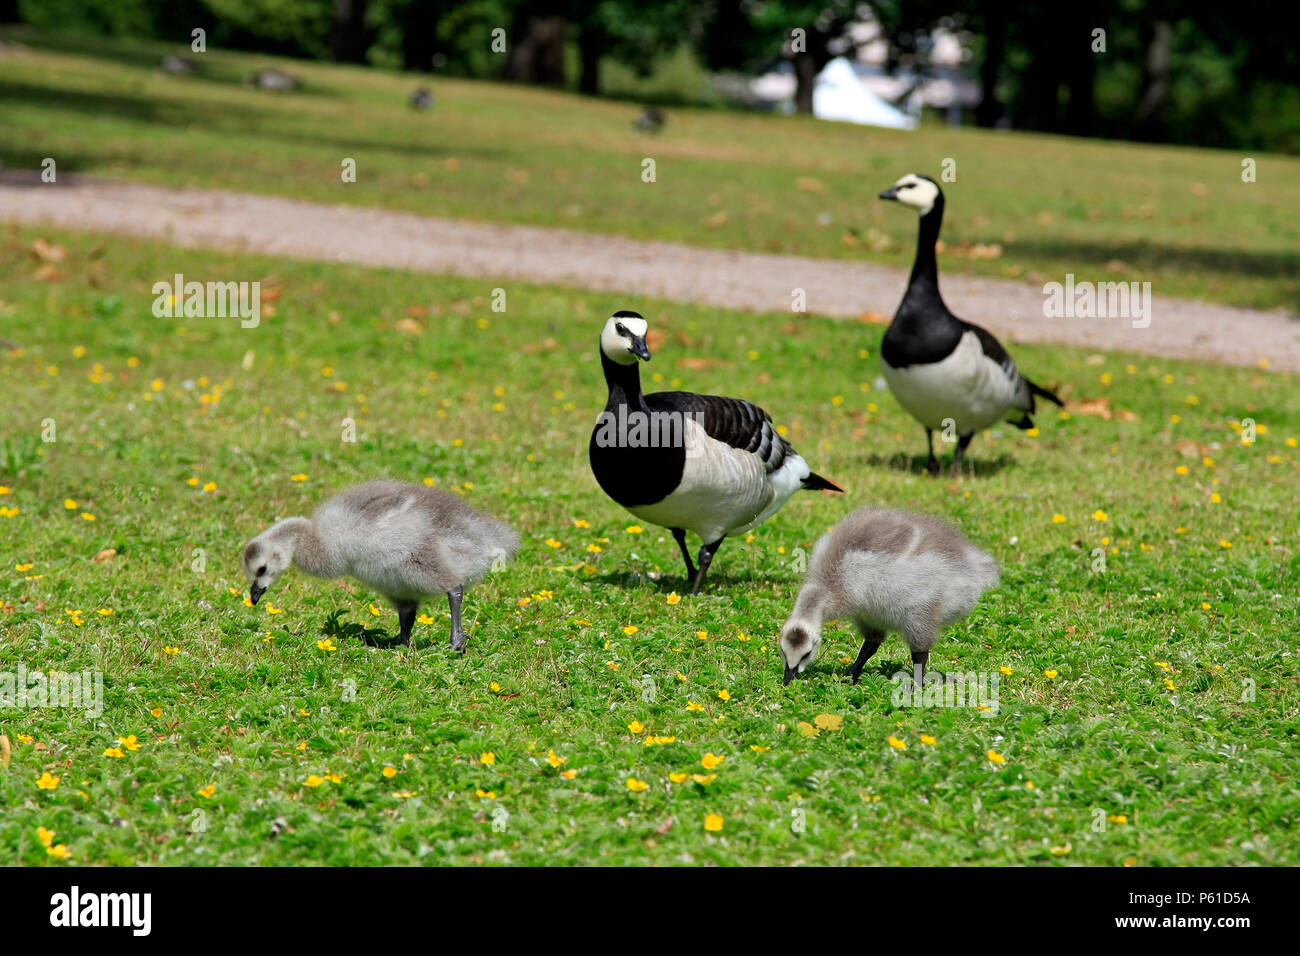 Barnacle geese, Branta leucopsis, two chicks feeding on grass in park with two adult birds on the background. Stock Photo